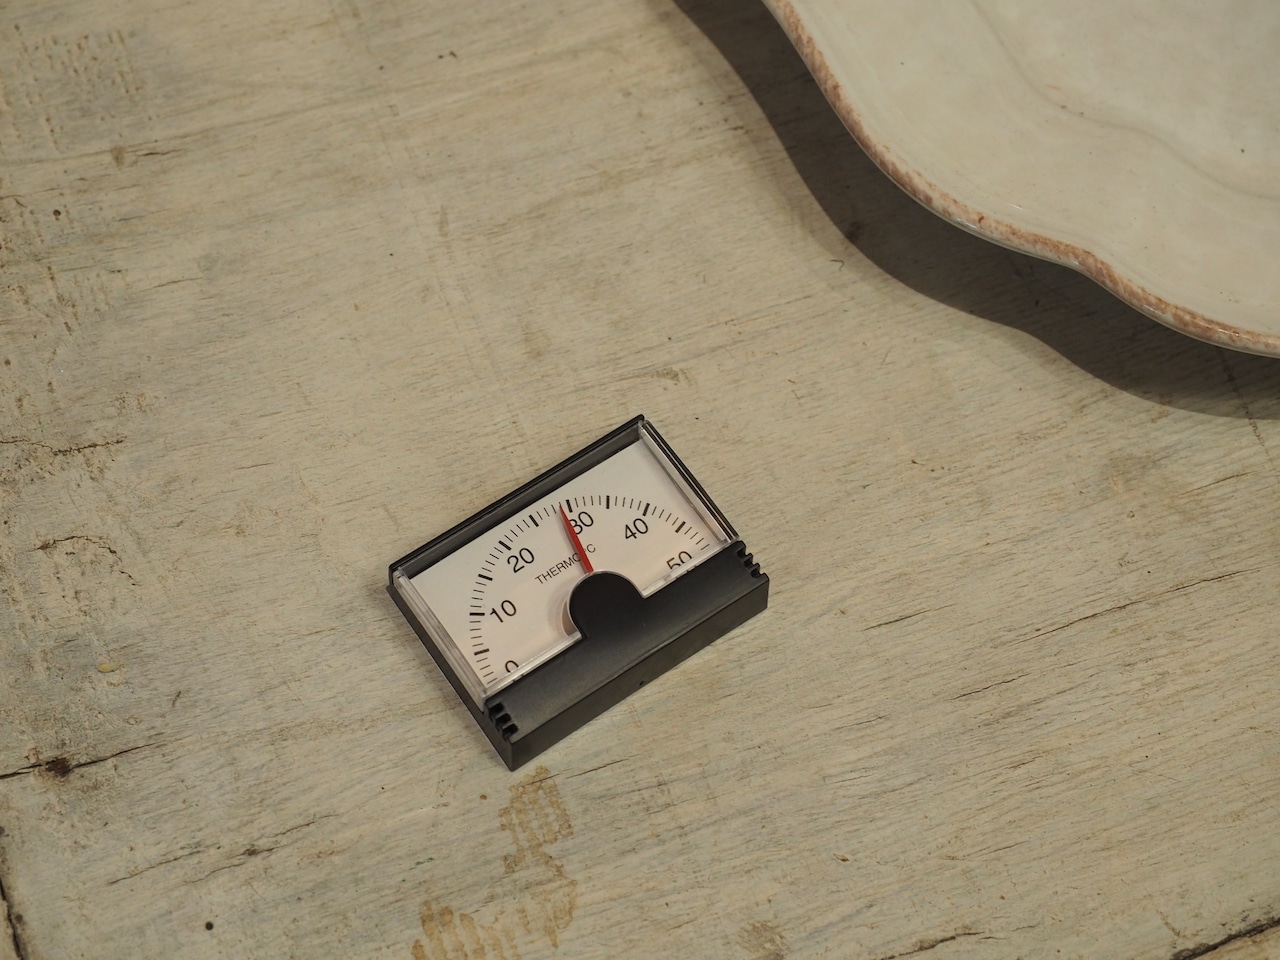 Analogue thermometer 16.1002